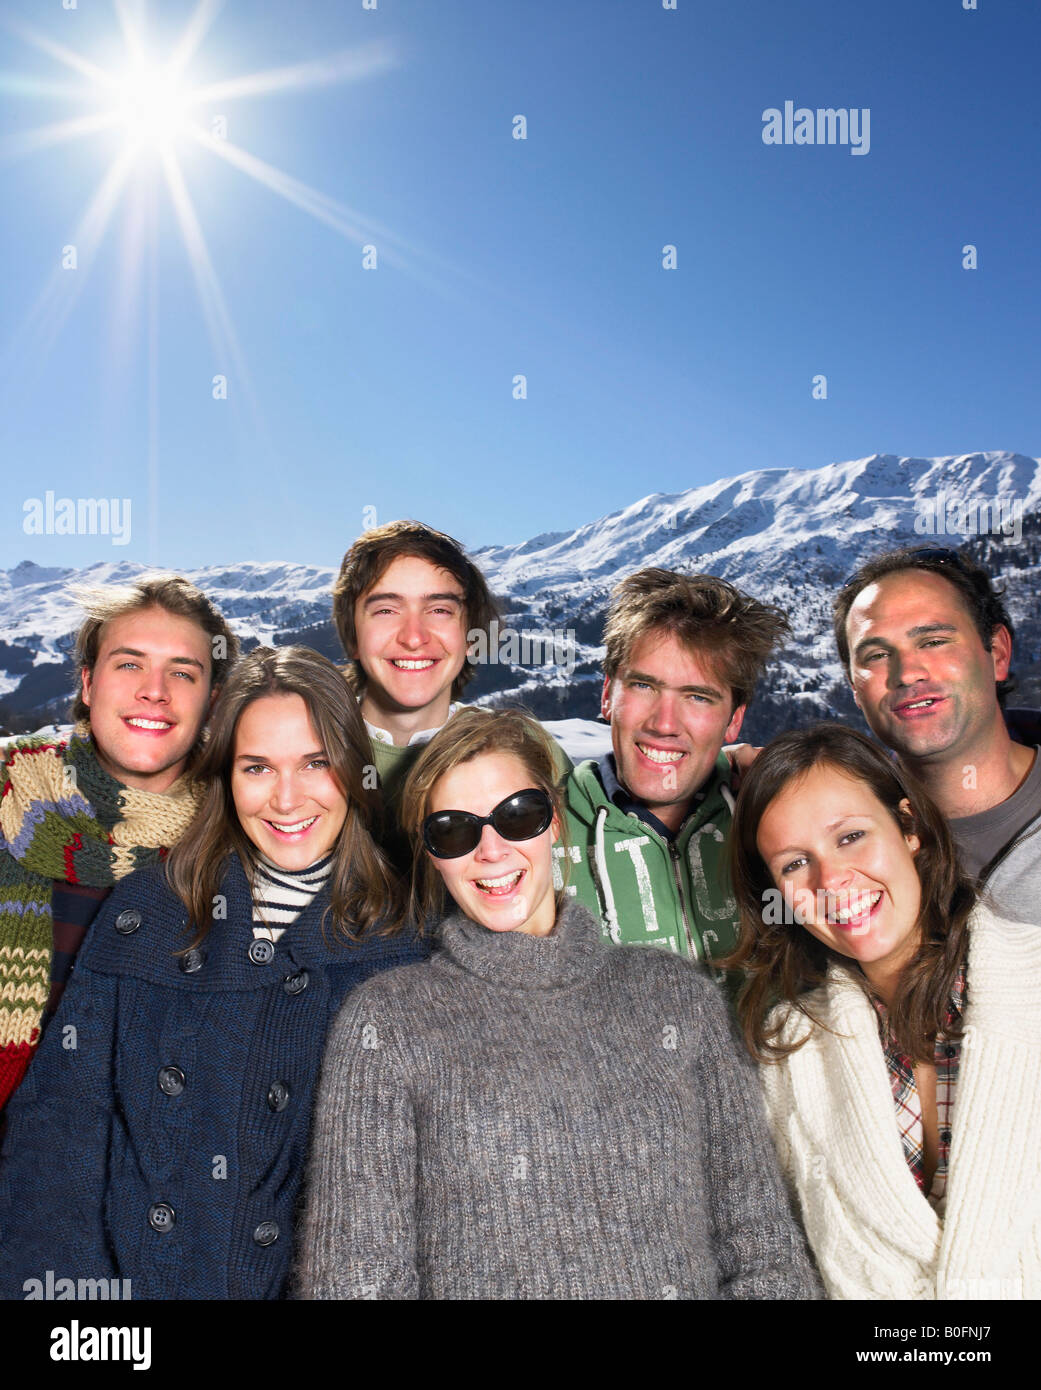 Smiling group at mountains Stock Photo